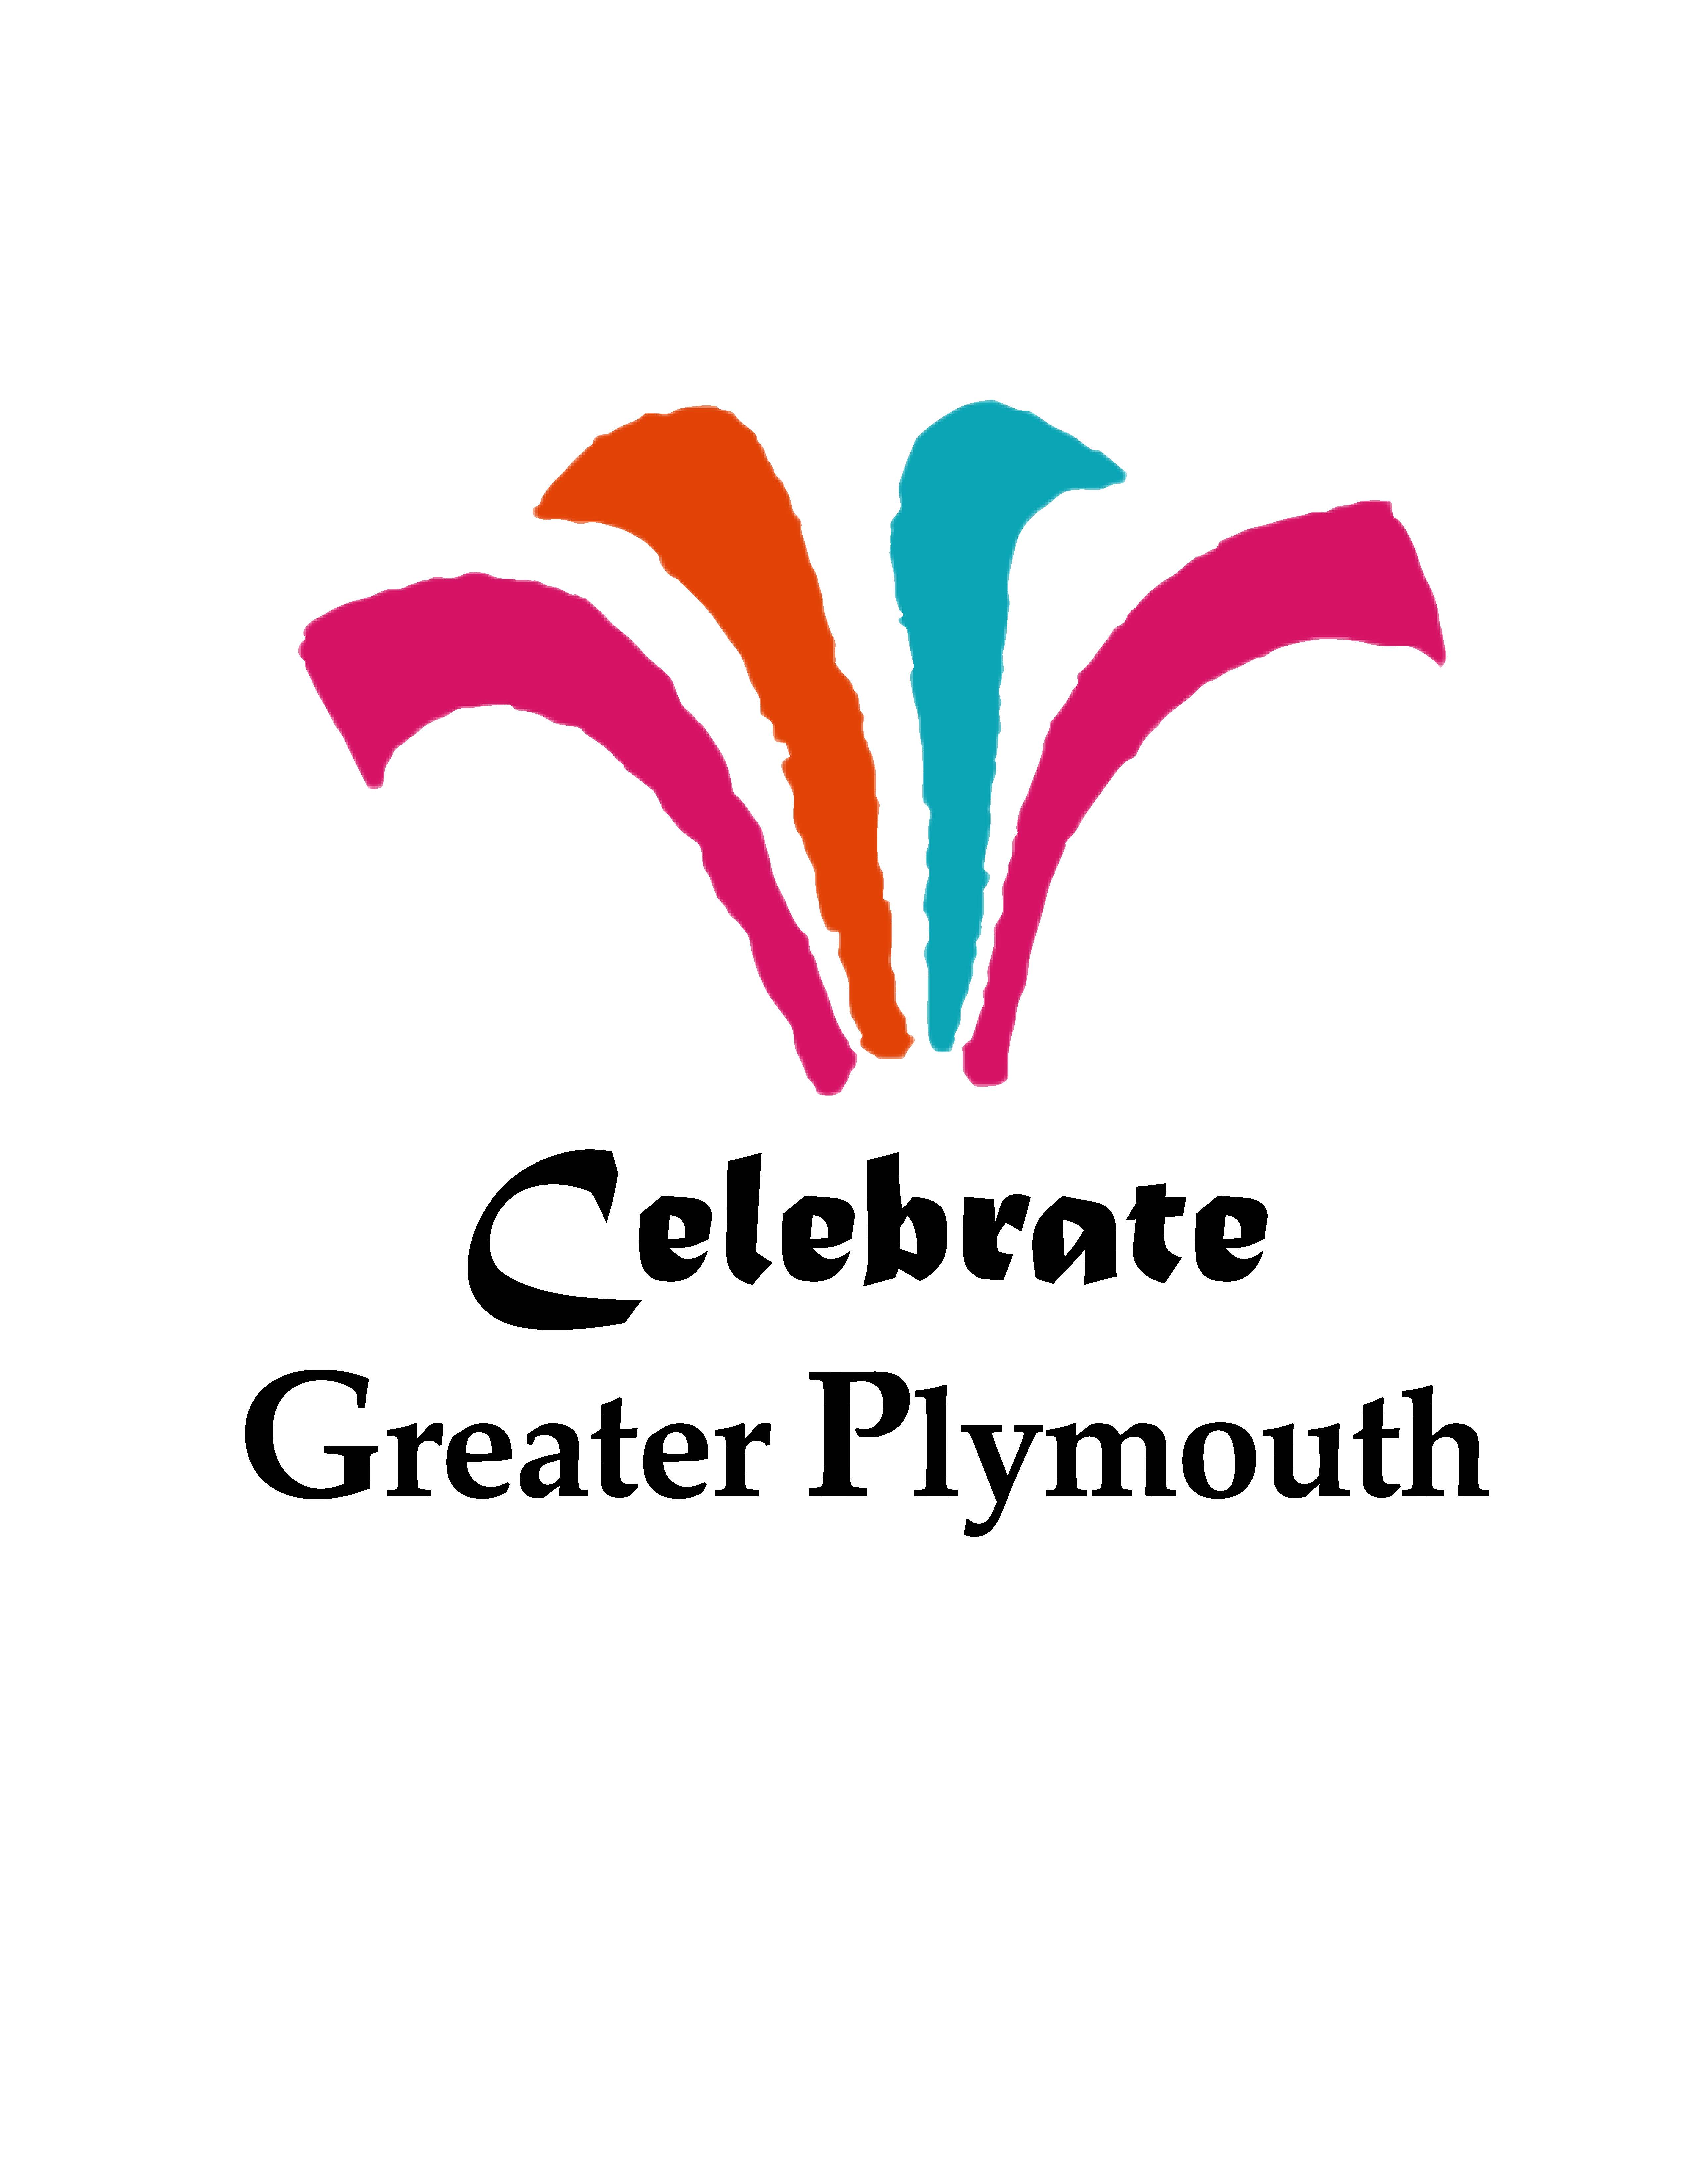 Celebrate Greater Plymouth, Inc. logo